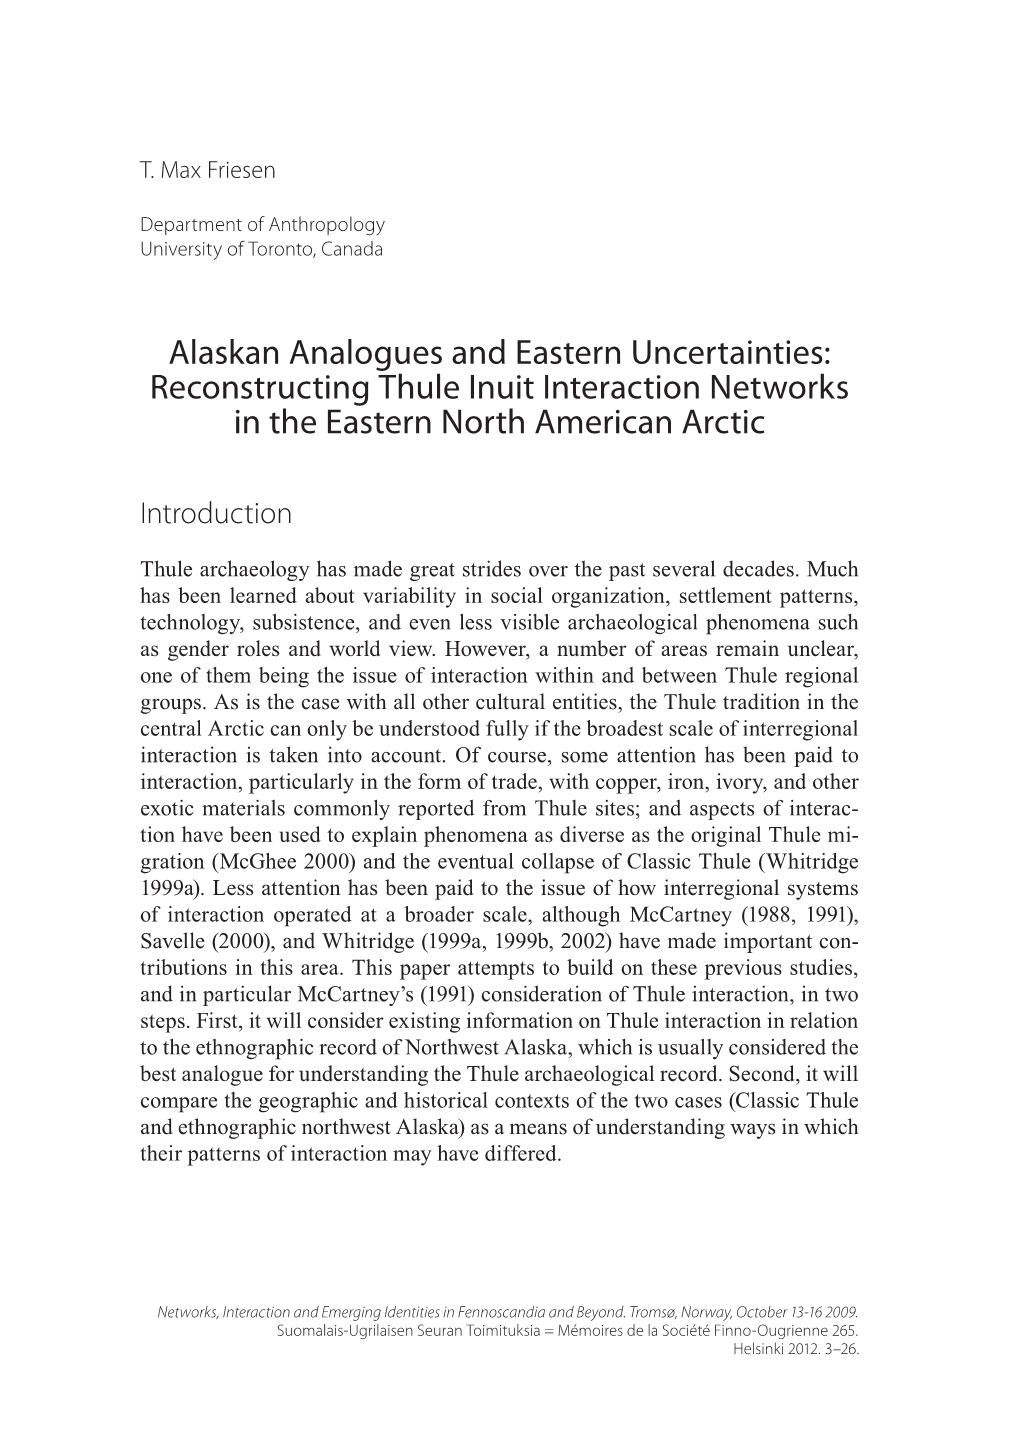 Alaskan Analogues and Eastern Uncertainties: Reconstructing Thule Inuit Interaction Networks in the Eastern North American Arctic